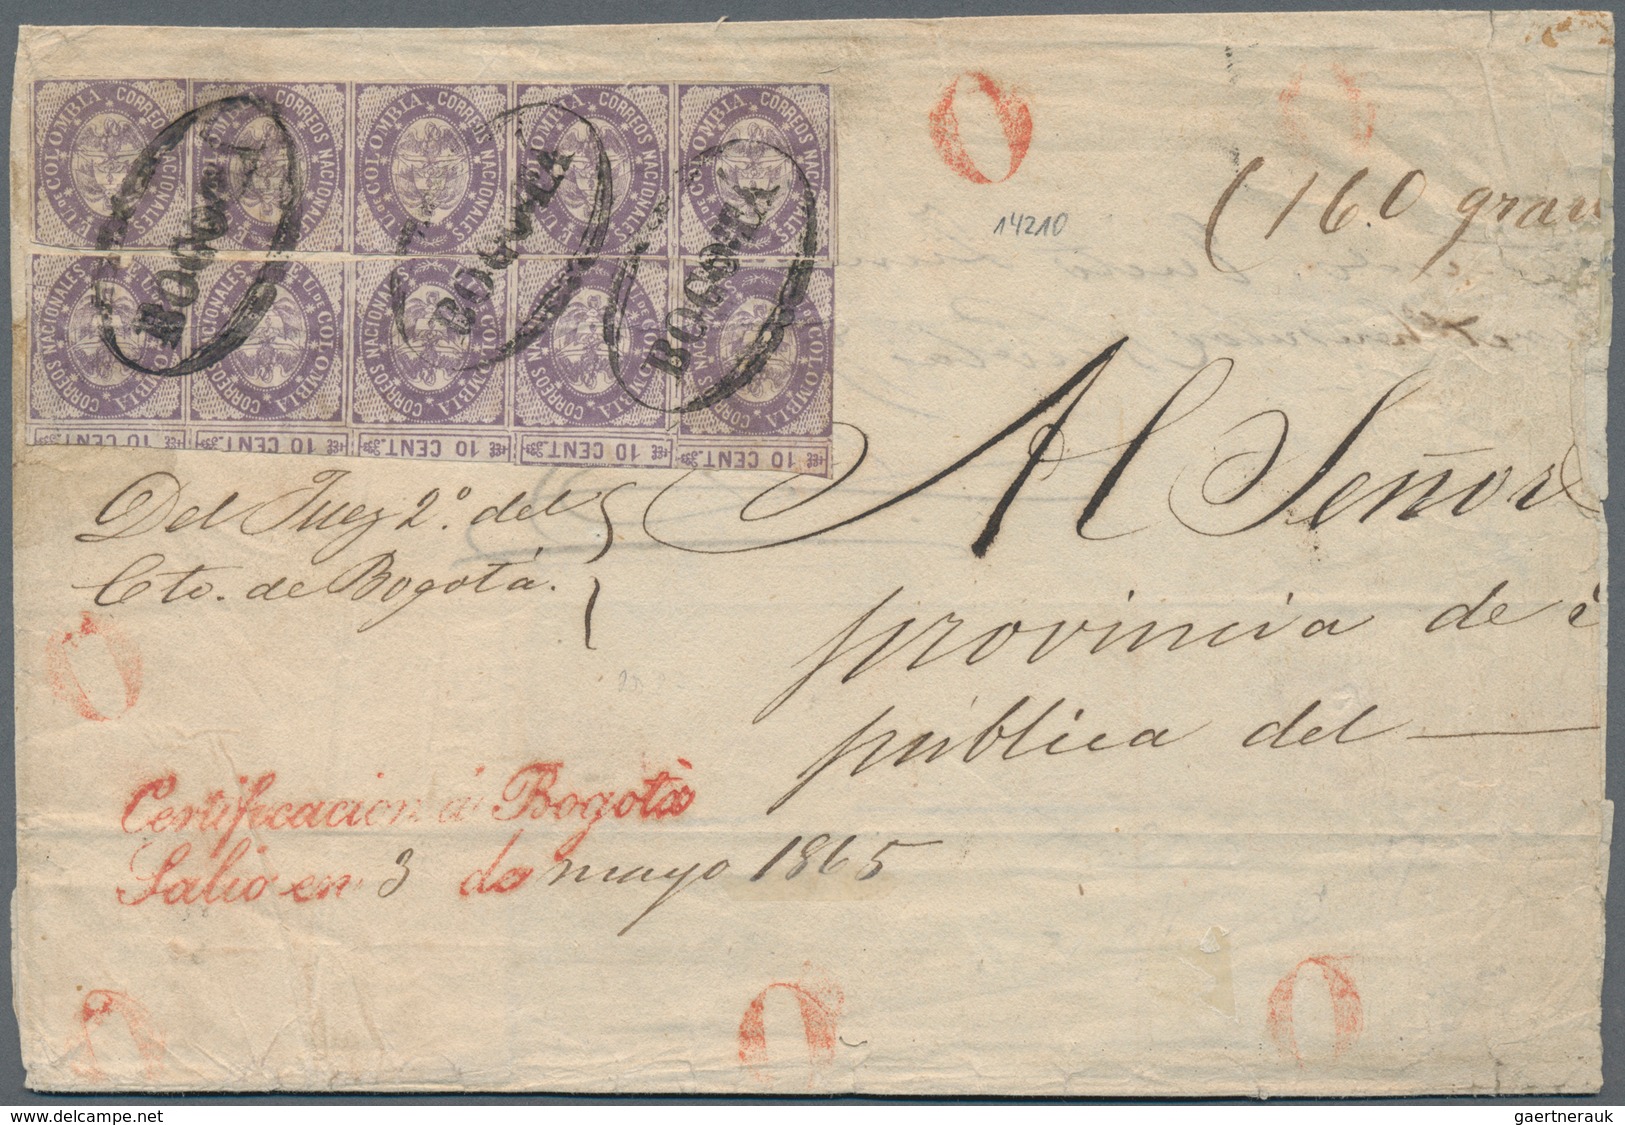 Kolumbien: 1865, 10c Violet Two Stripes Of Five On Letter From Bogota To Quito Cancelled With Oval P - Kolumbien